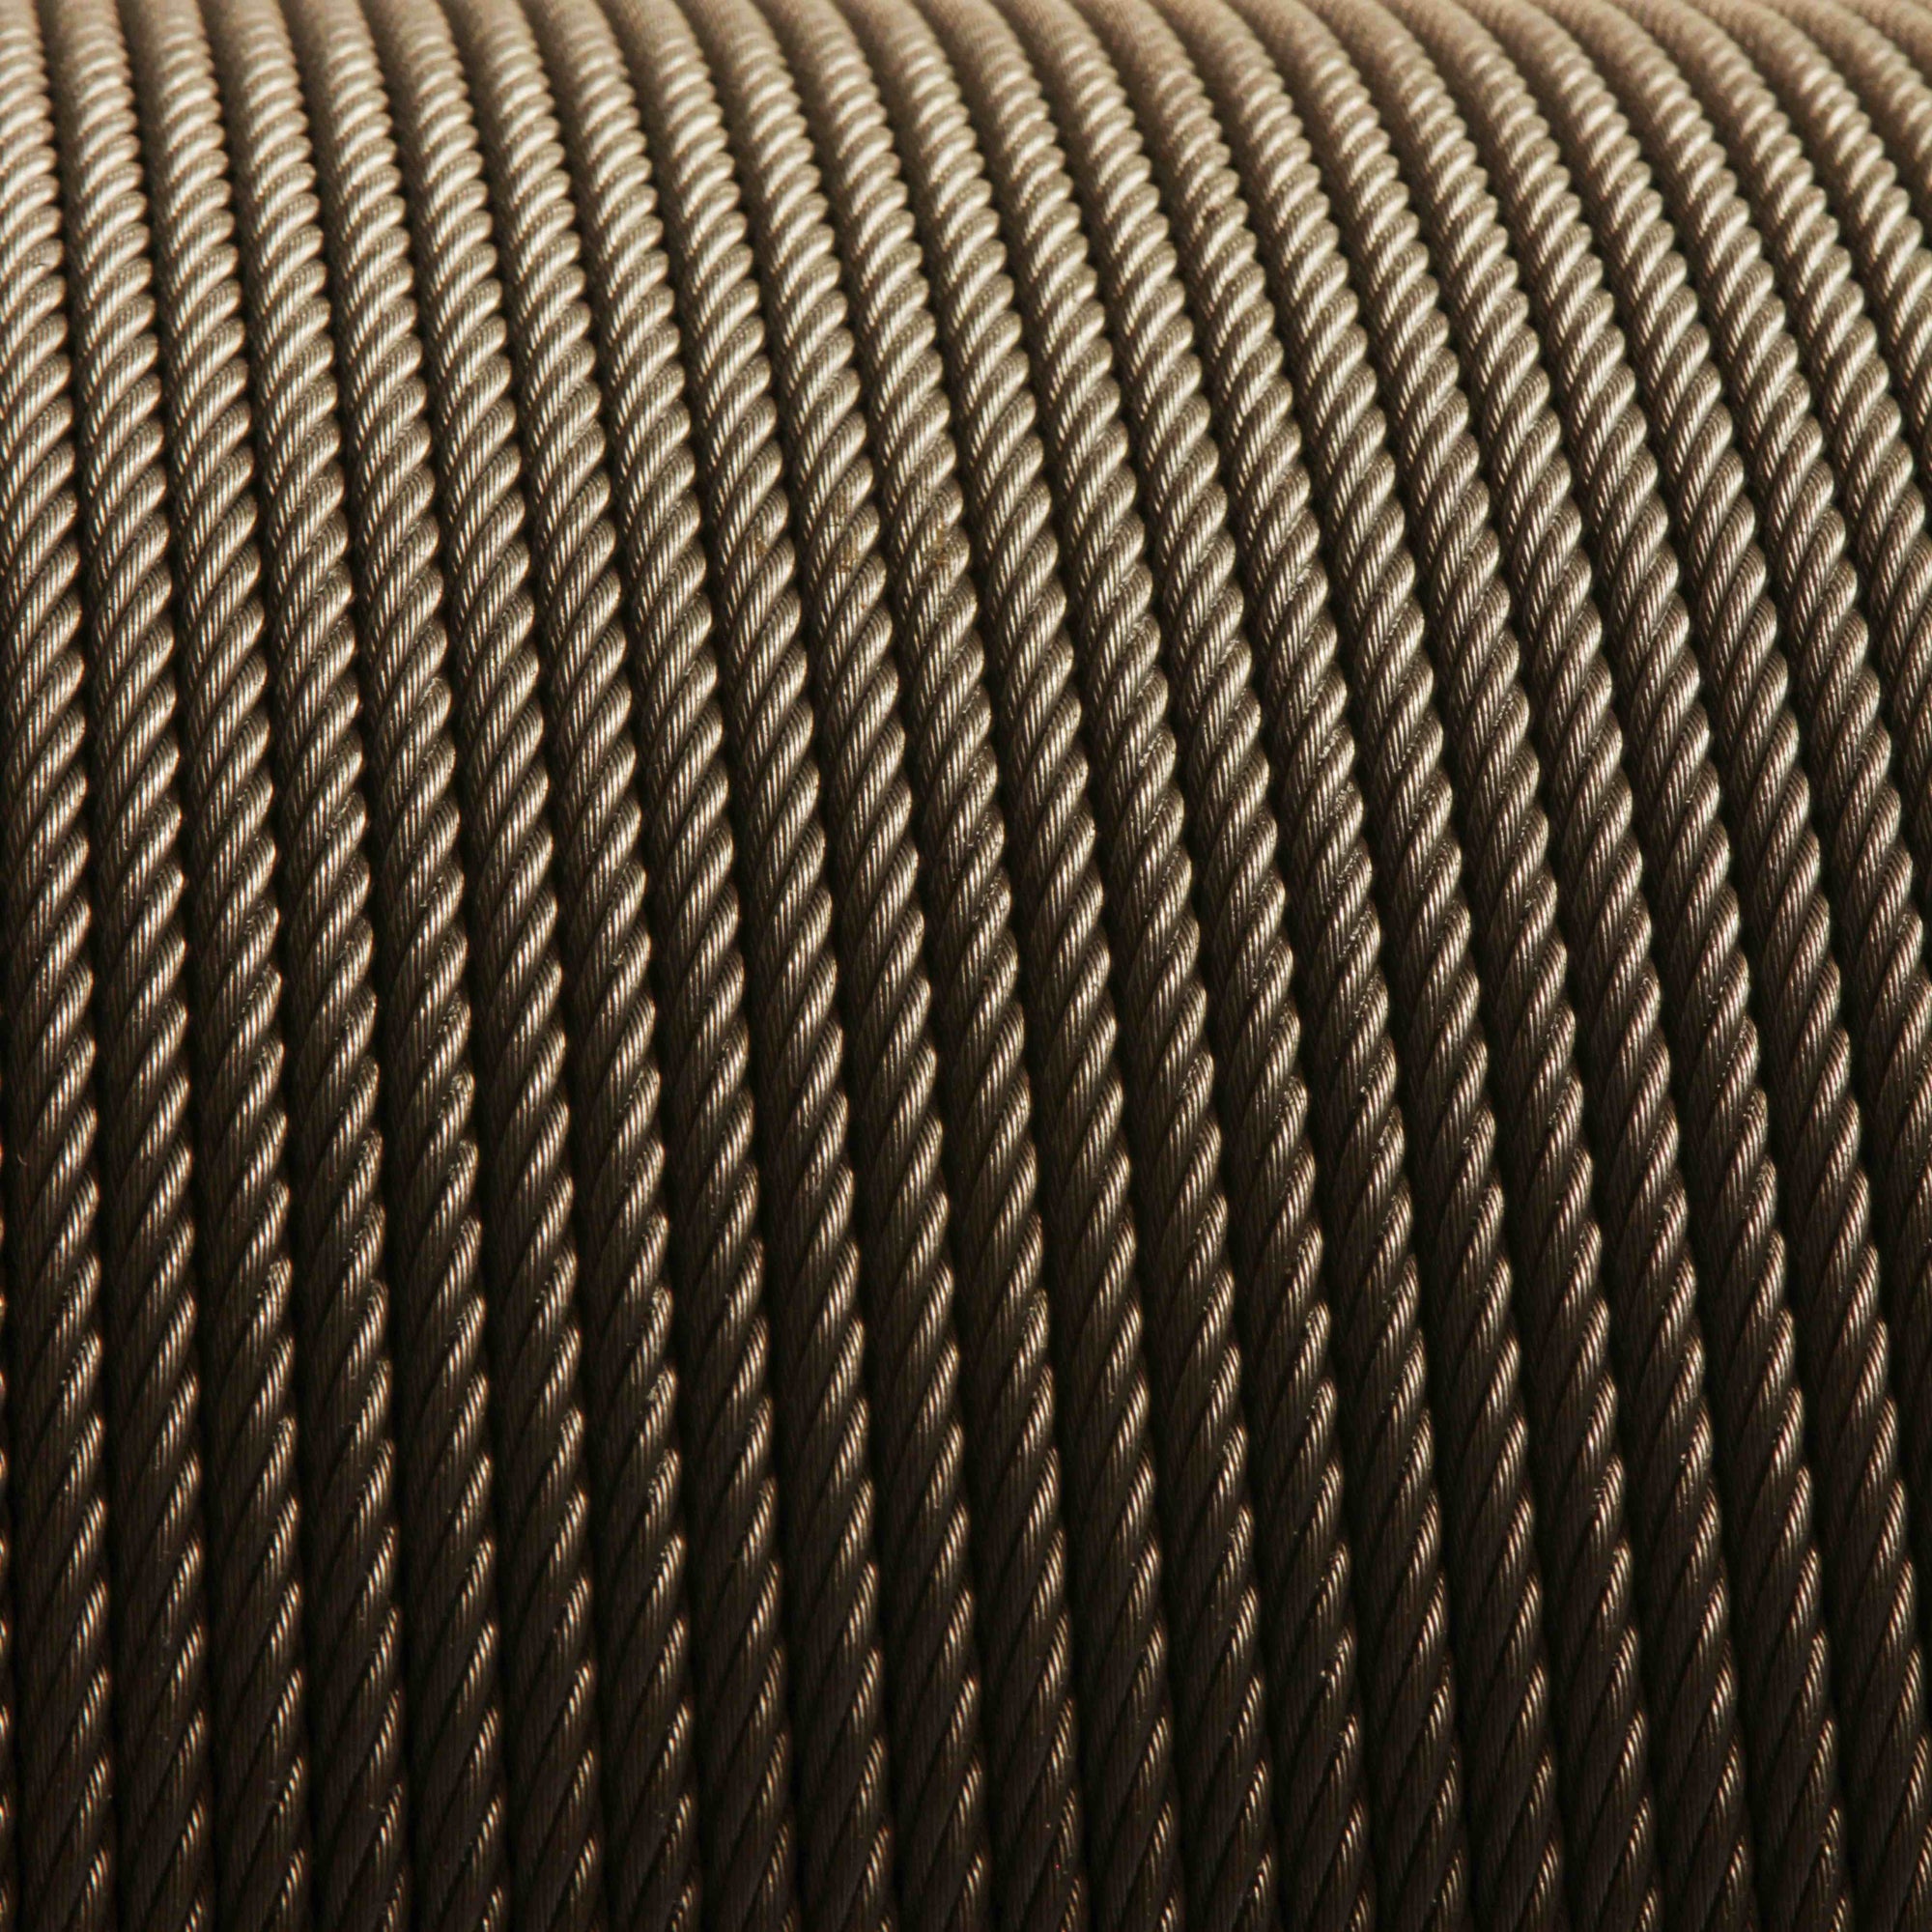 Spool of wire rope